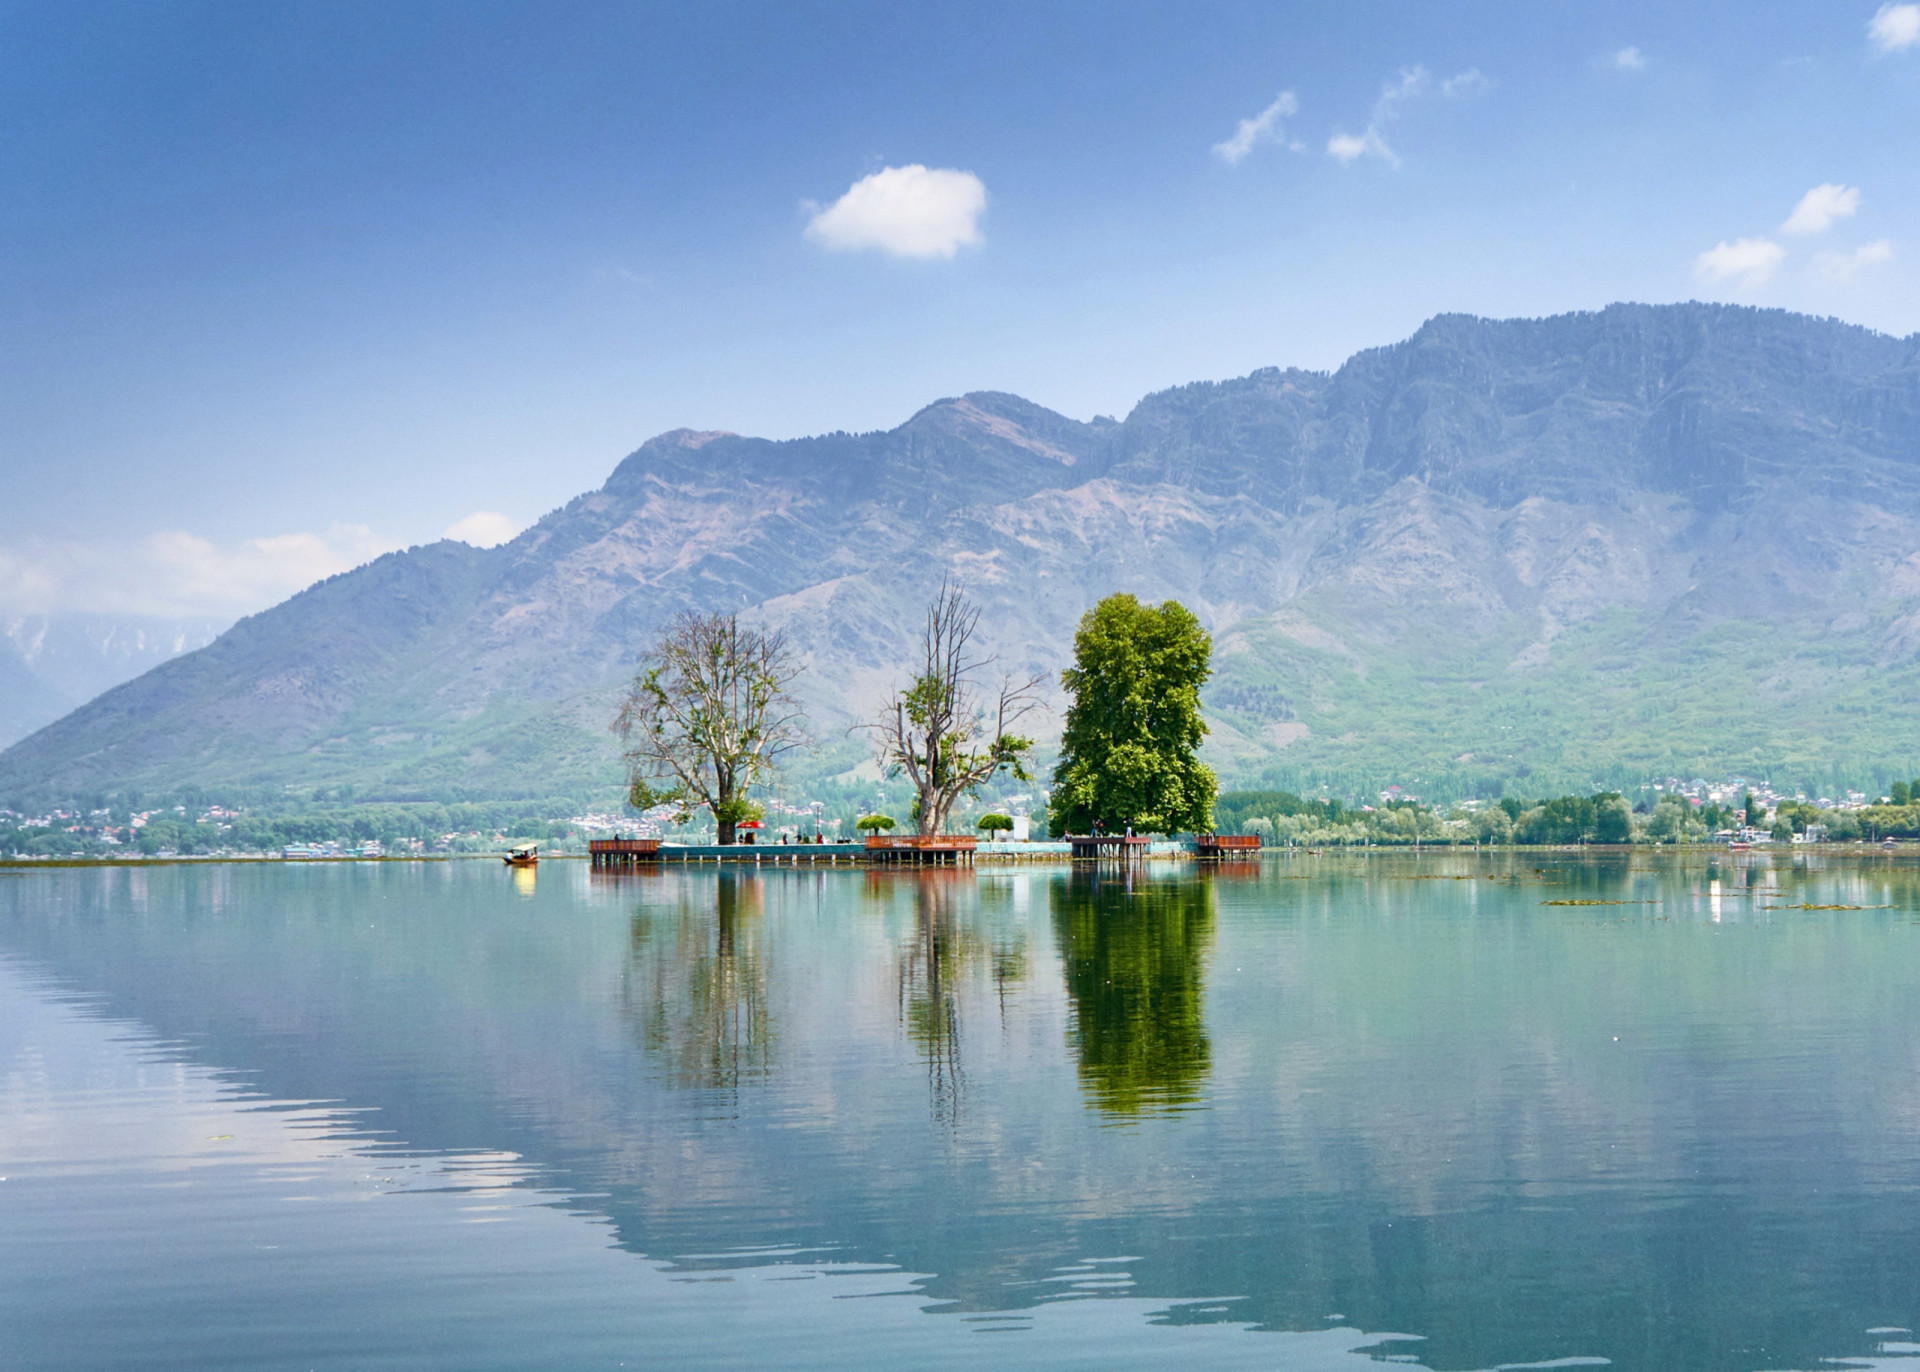 <p>Enchanting Char Chinar is an island in Dal Lake near Srinagar, in India's Jammu and Kashmir region. It's named as such for the majestic Chinar trees set at the four corners of the diminutive island.</p><p>You may also like:<a href="https://www.starsinsider.com/n/443976?utm_source=msn.com&utm_medium=display&utm_campaign=referral_description&utm_content=689150en-nz"> Talk show secrets all live TV audiences should know</a></p>